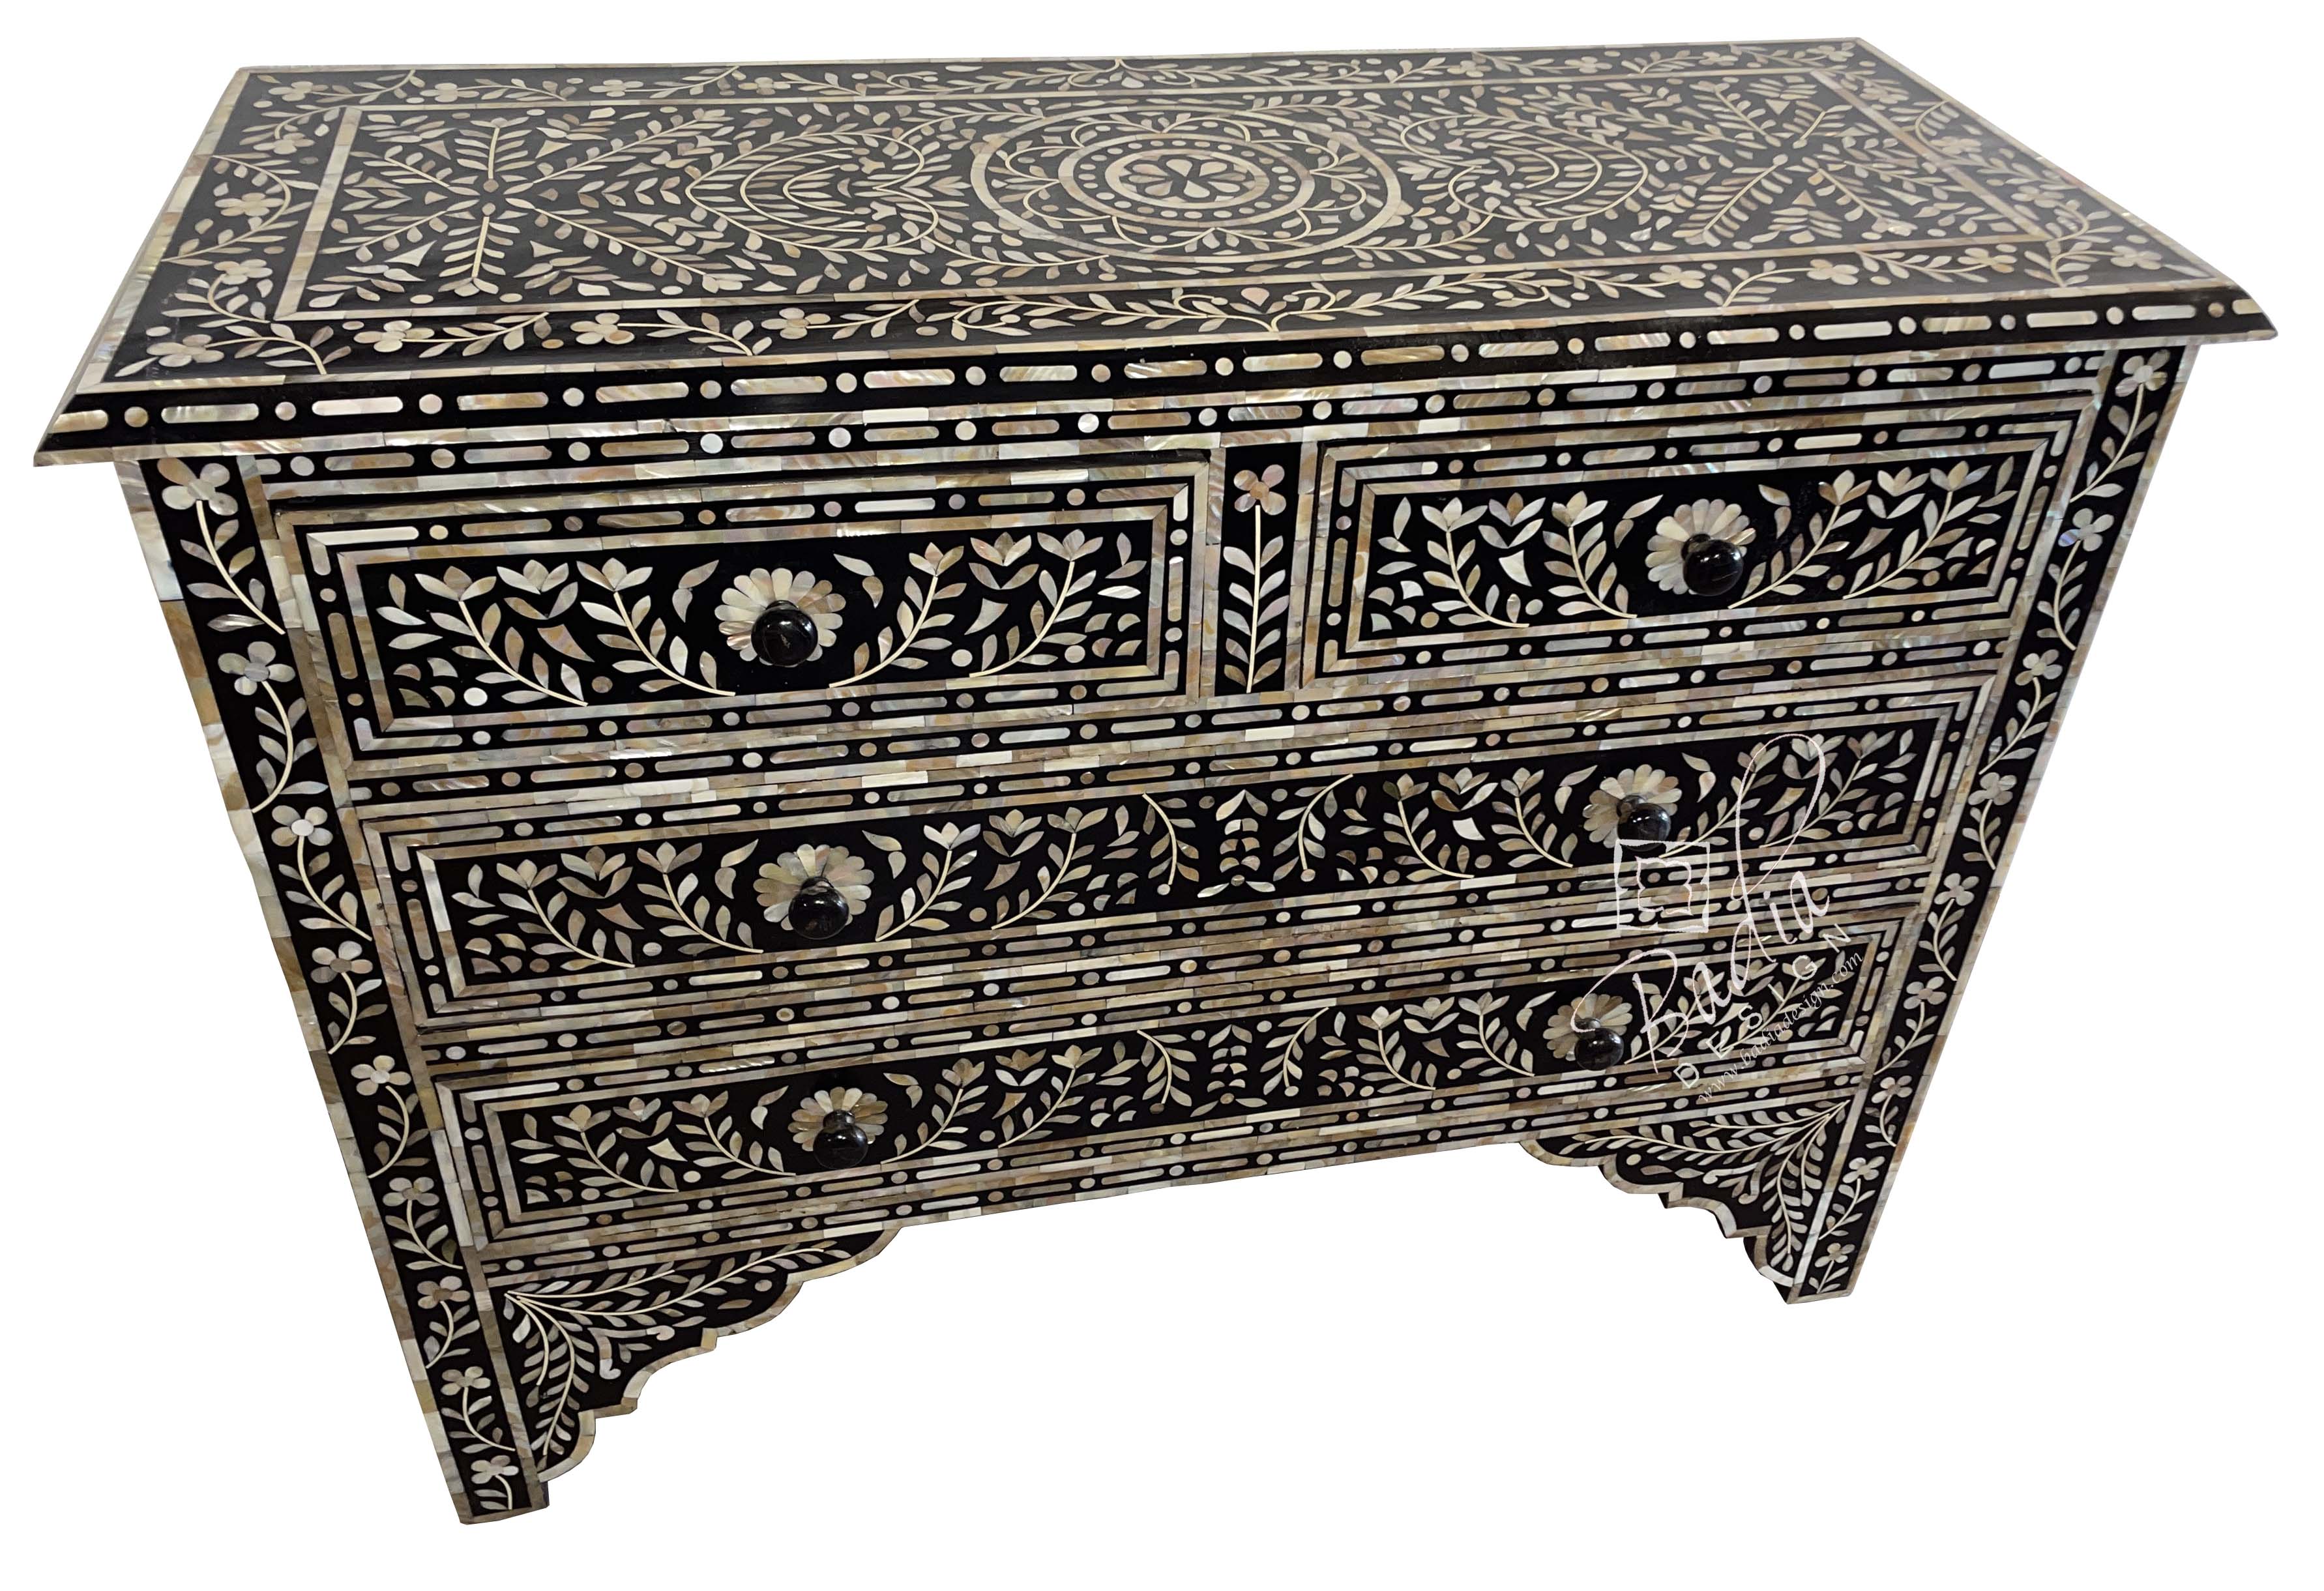 moroccan-black-mother-of-pearl-inlay-dresser-mop-dr074-1.jpg